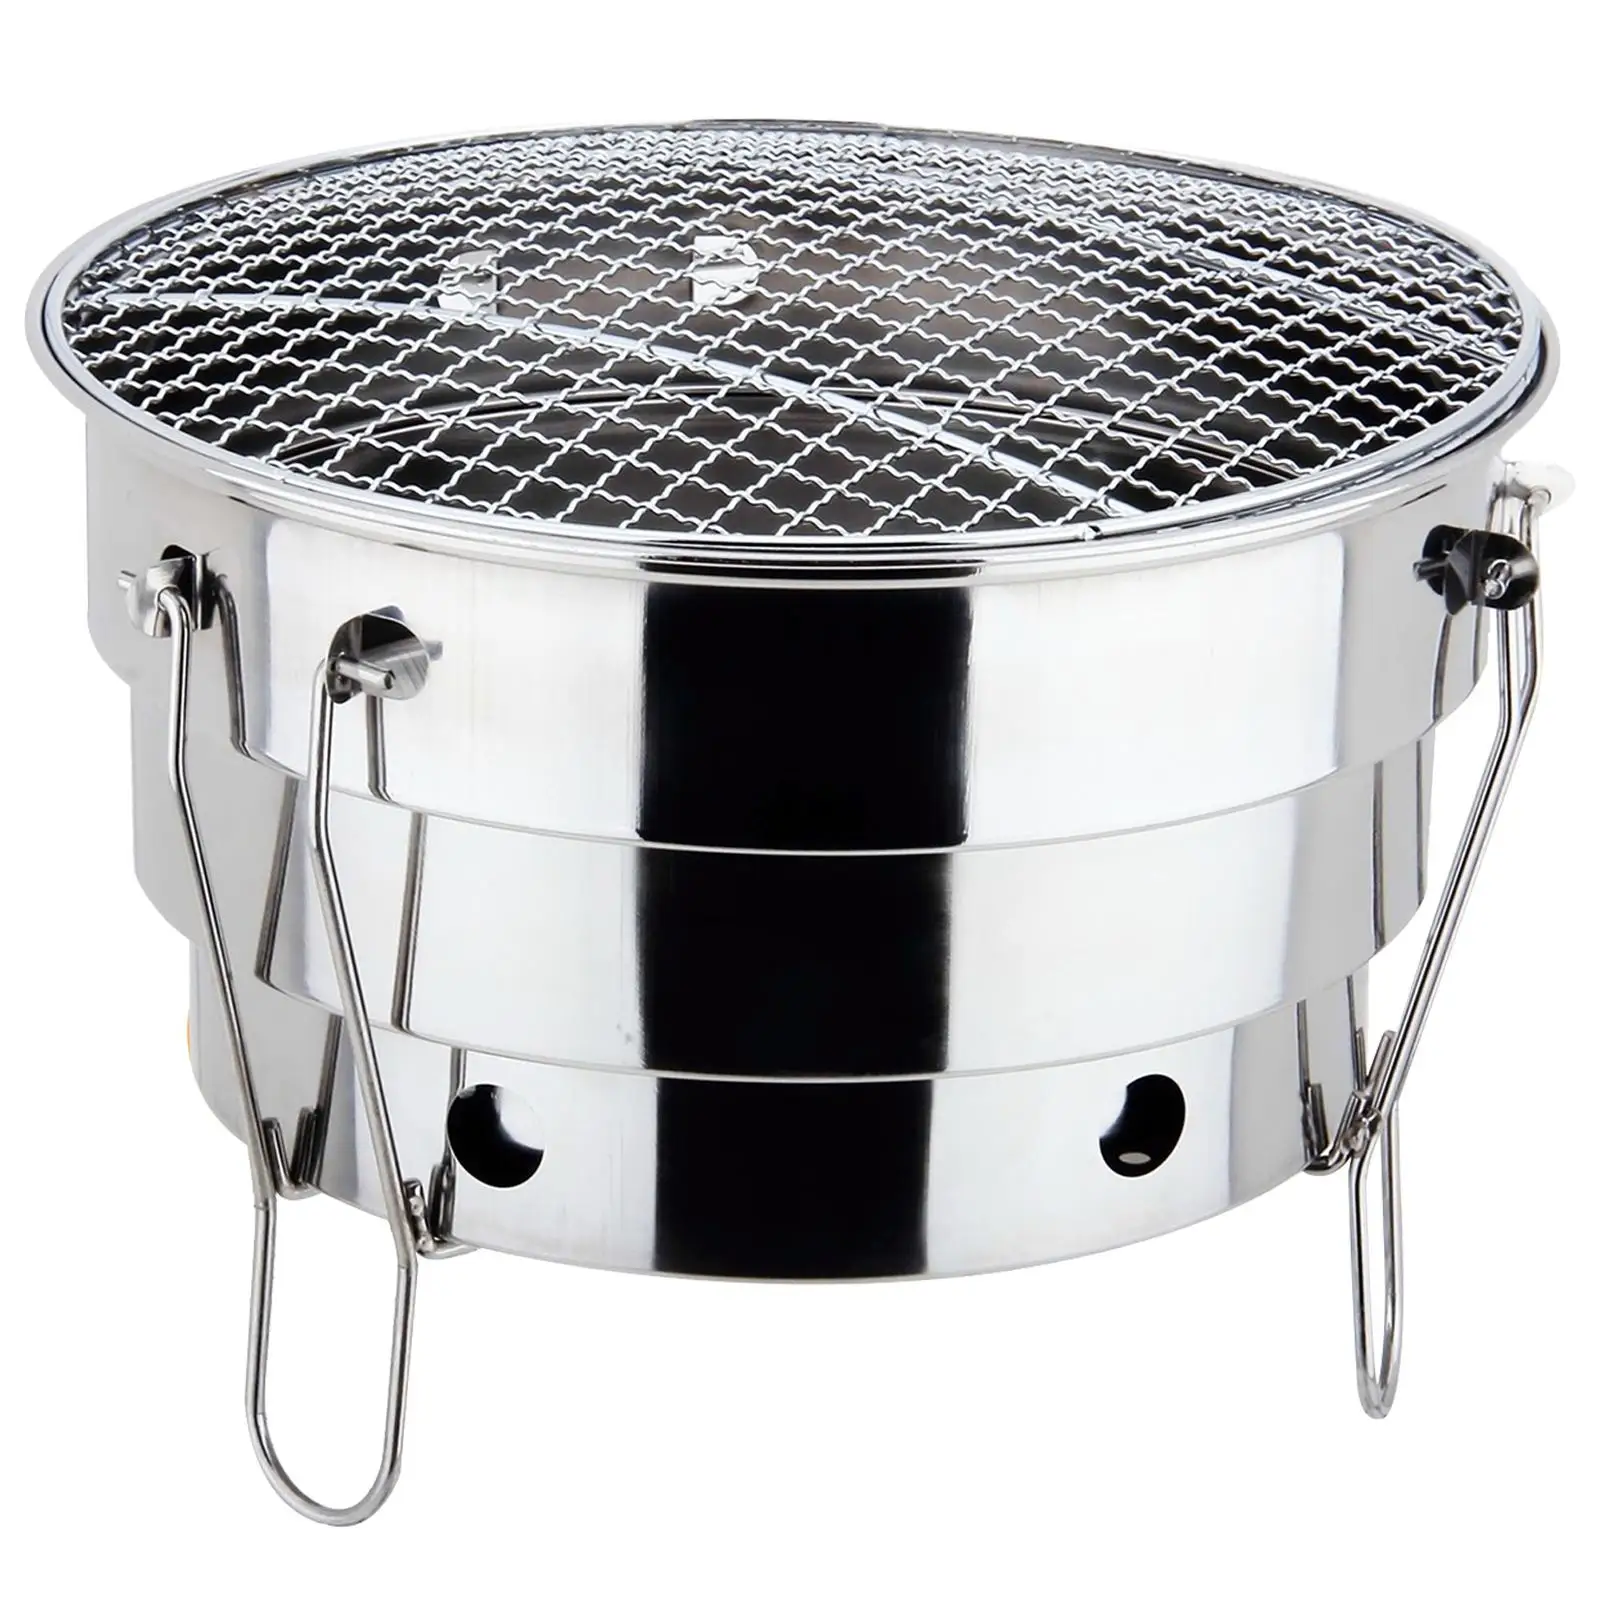 

Portable Bbq Grill Tabletop Folding Stainless Steel Fire Pit Cooking Supplies Indoor Outdoor Charcoal Grill For Camping Picnic